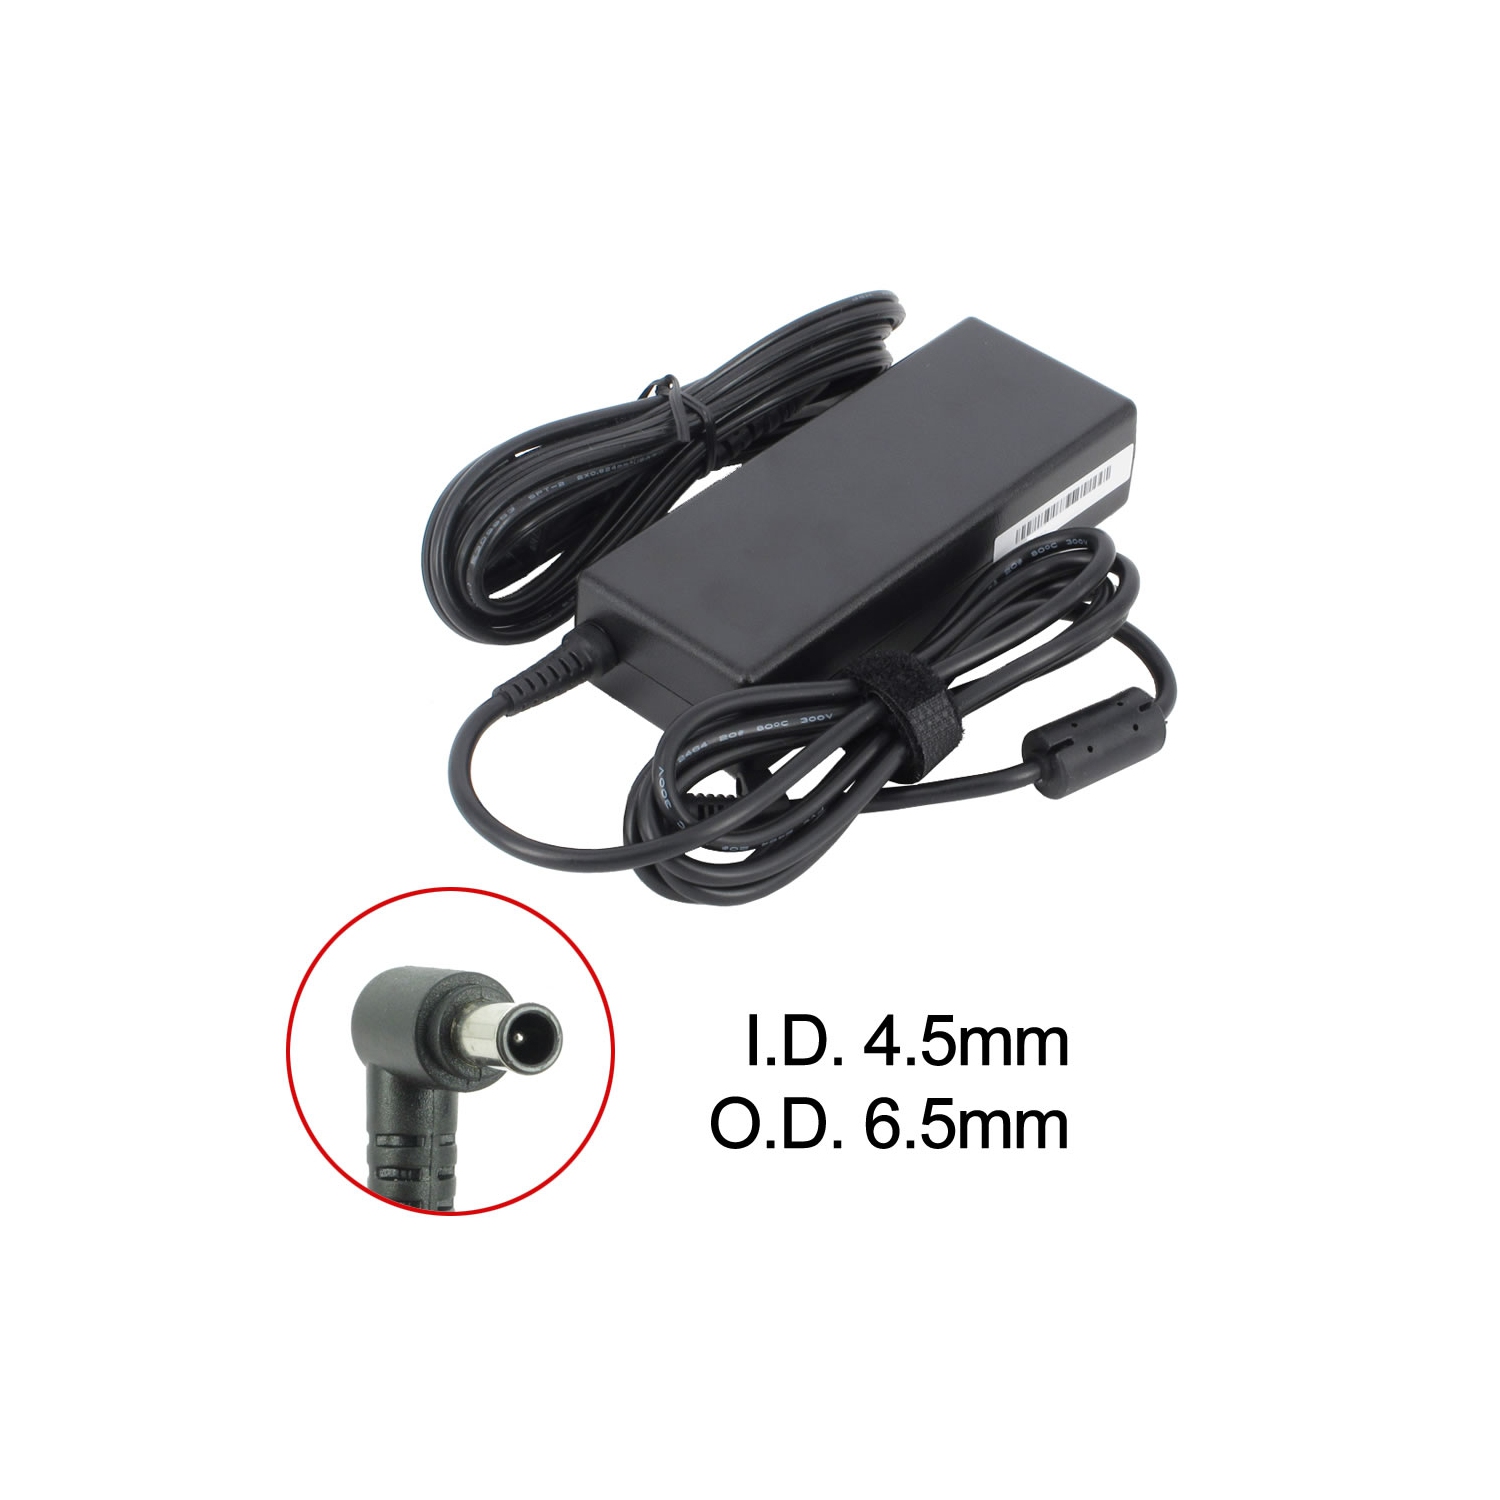 Brand New Laptop AC Adapter for Sony VAIO VGN-FJ12W, PCGA-AC19V10, PCGA-AC19V3, VGP-AC19V20, VGP-AC19V30, VGP-AC19V51